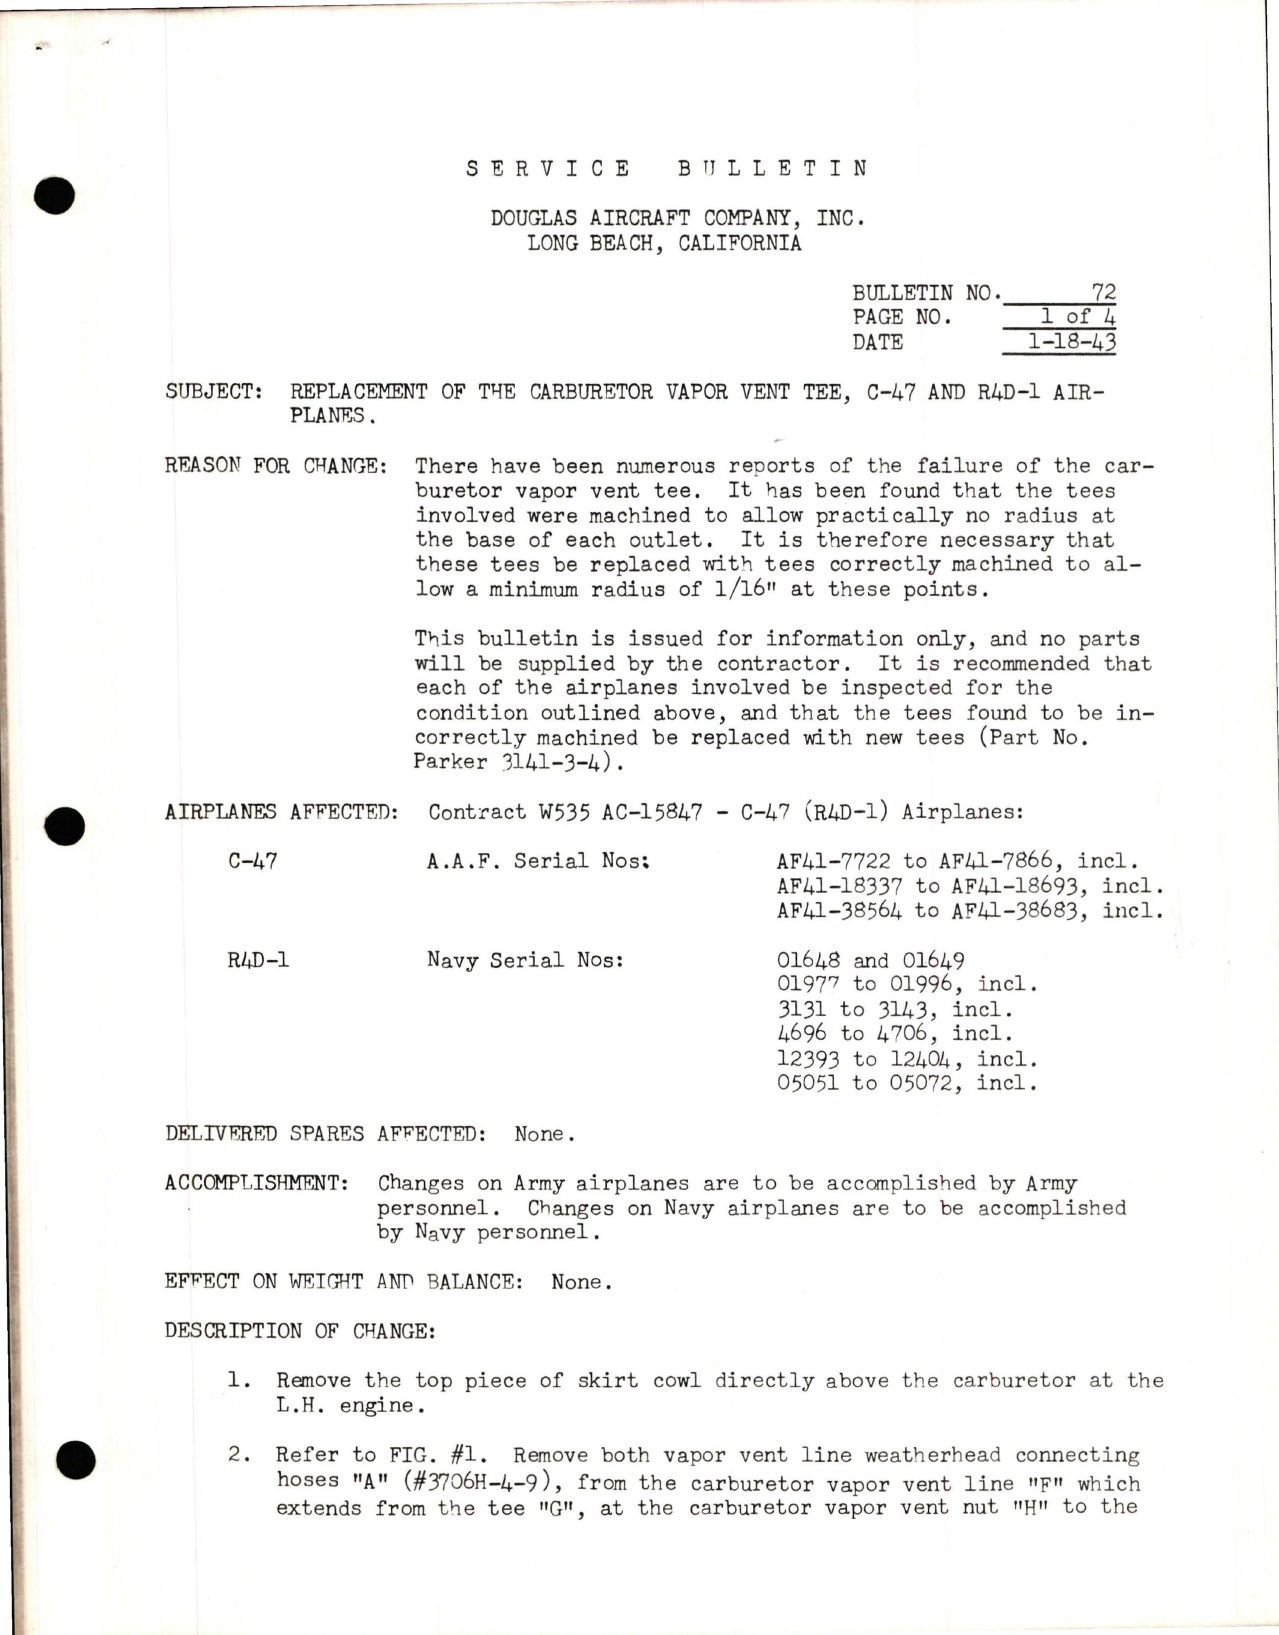 Sample page 1 from AirCorps Library document: Replacement of the Carburetor Vapor Vent Tee